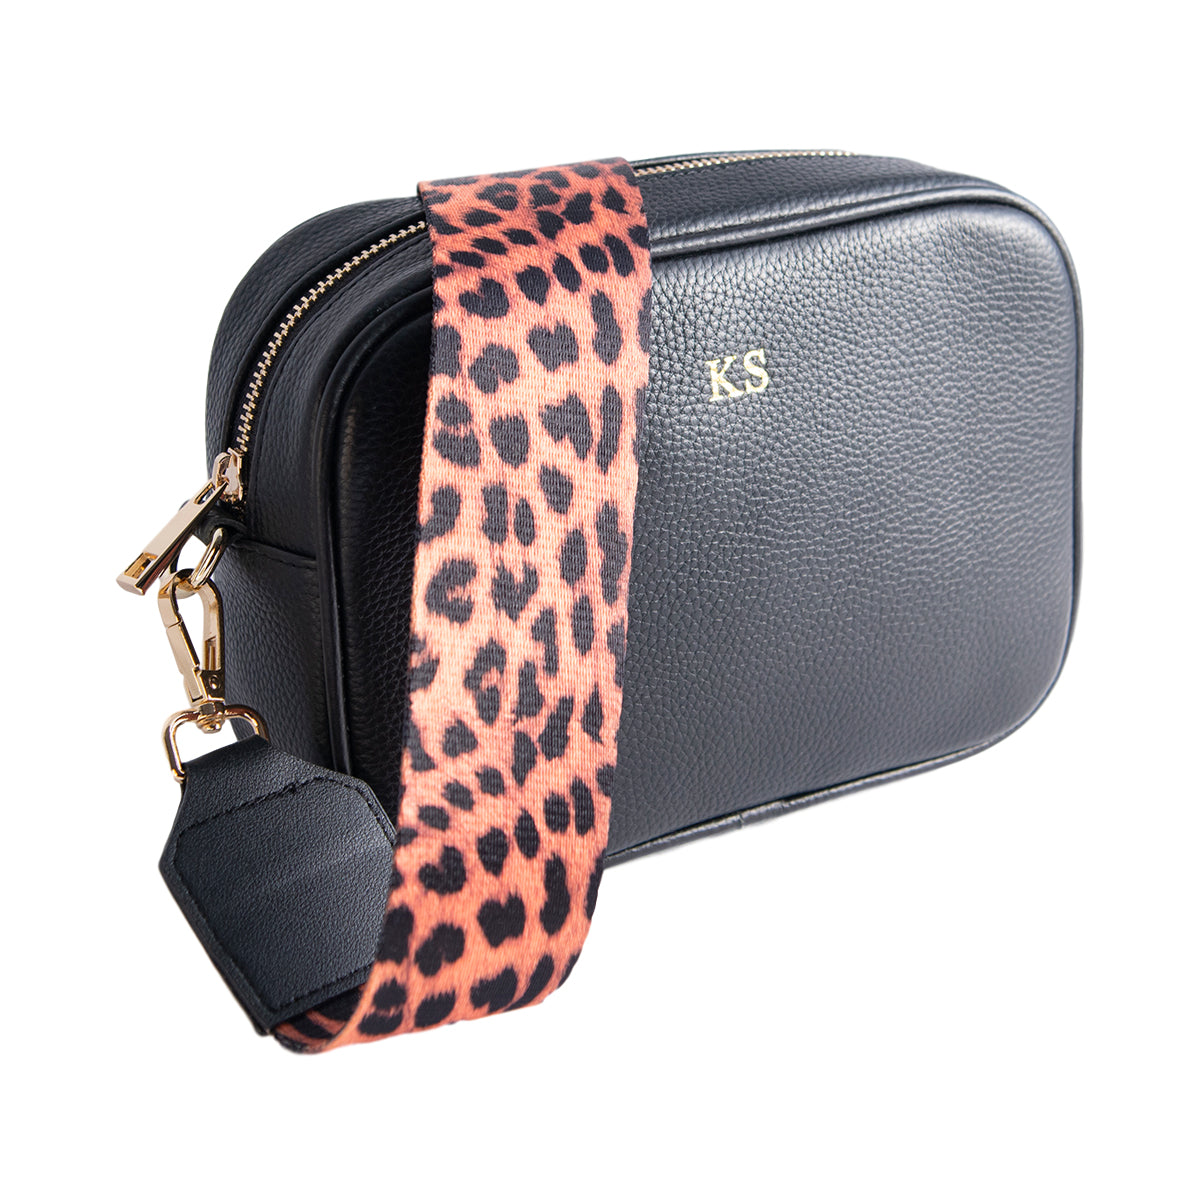 Personalised Black Cross Body Bag with Leopard Print Strap